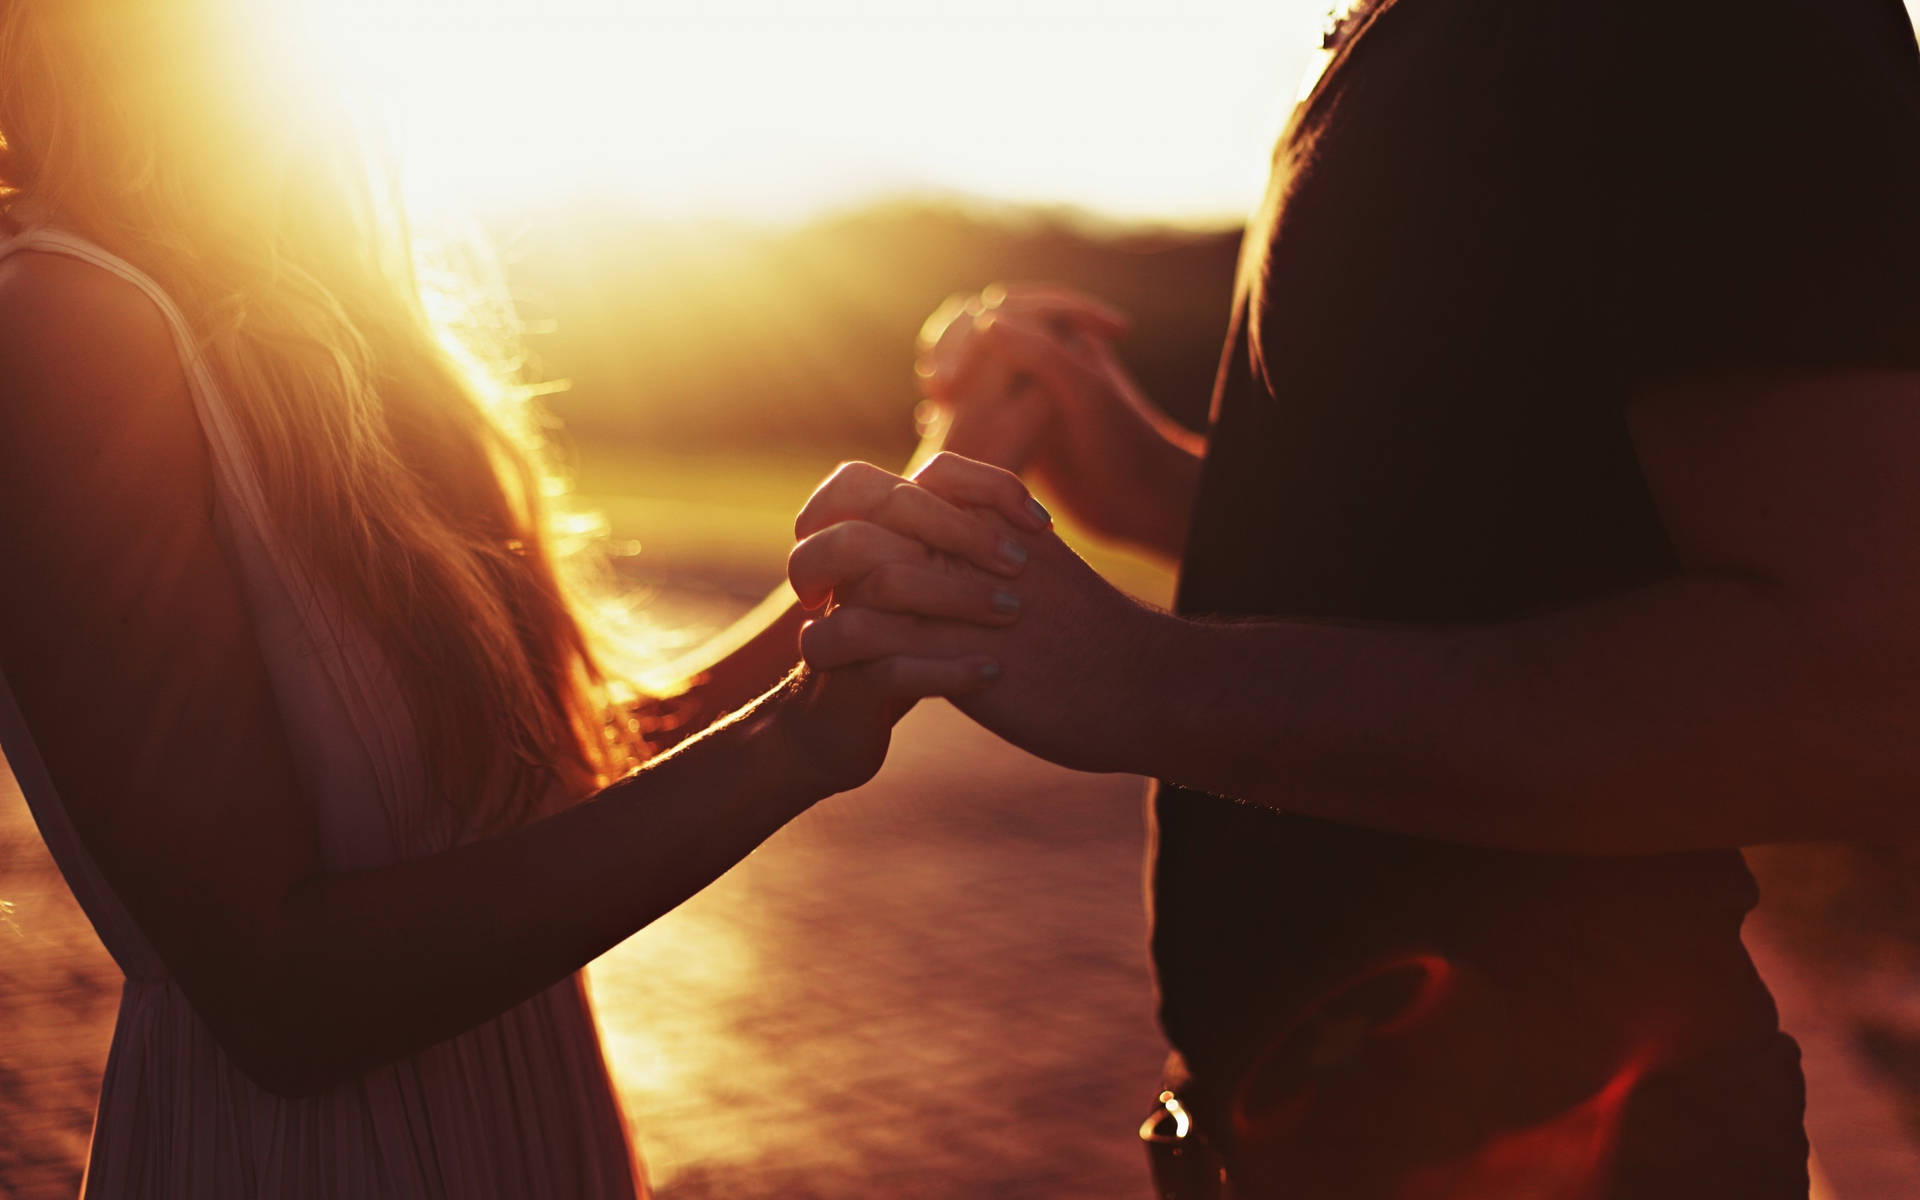 Holding Hands While Facing Each Other At Sunset Background